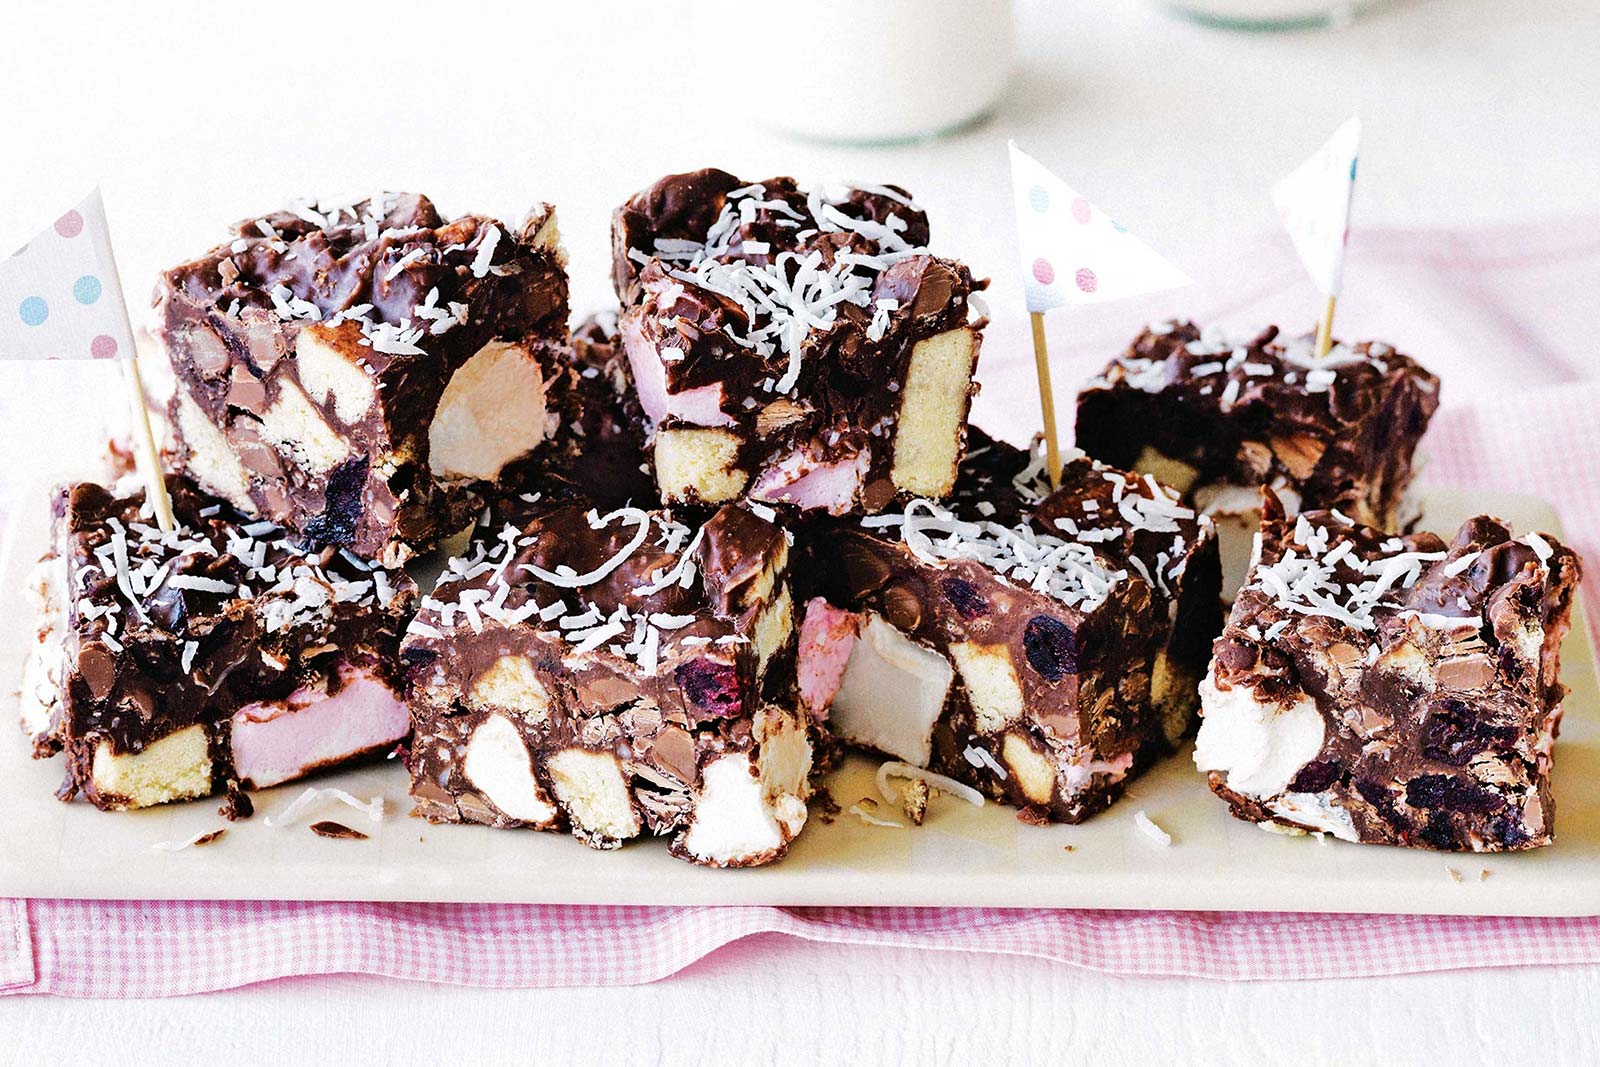 🍪 Only a True Chocoholic Will Have Eaten at Least 13/25 of These Treats Rocky Road